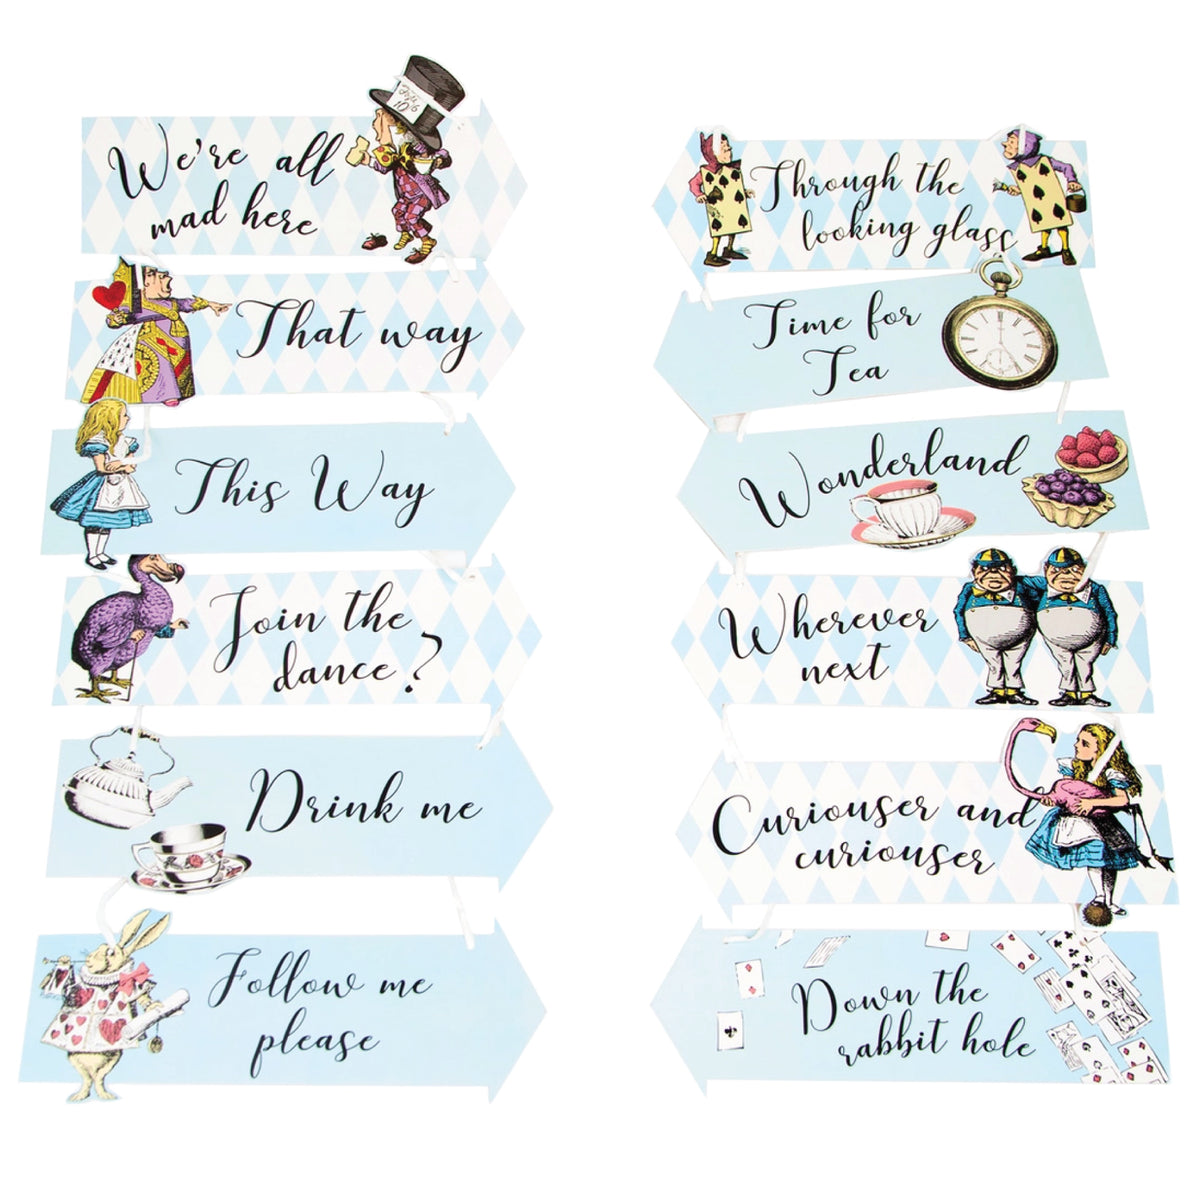 7 Must-Haves for an Alice in Wonderland Party!